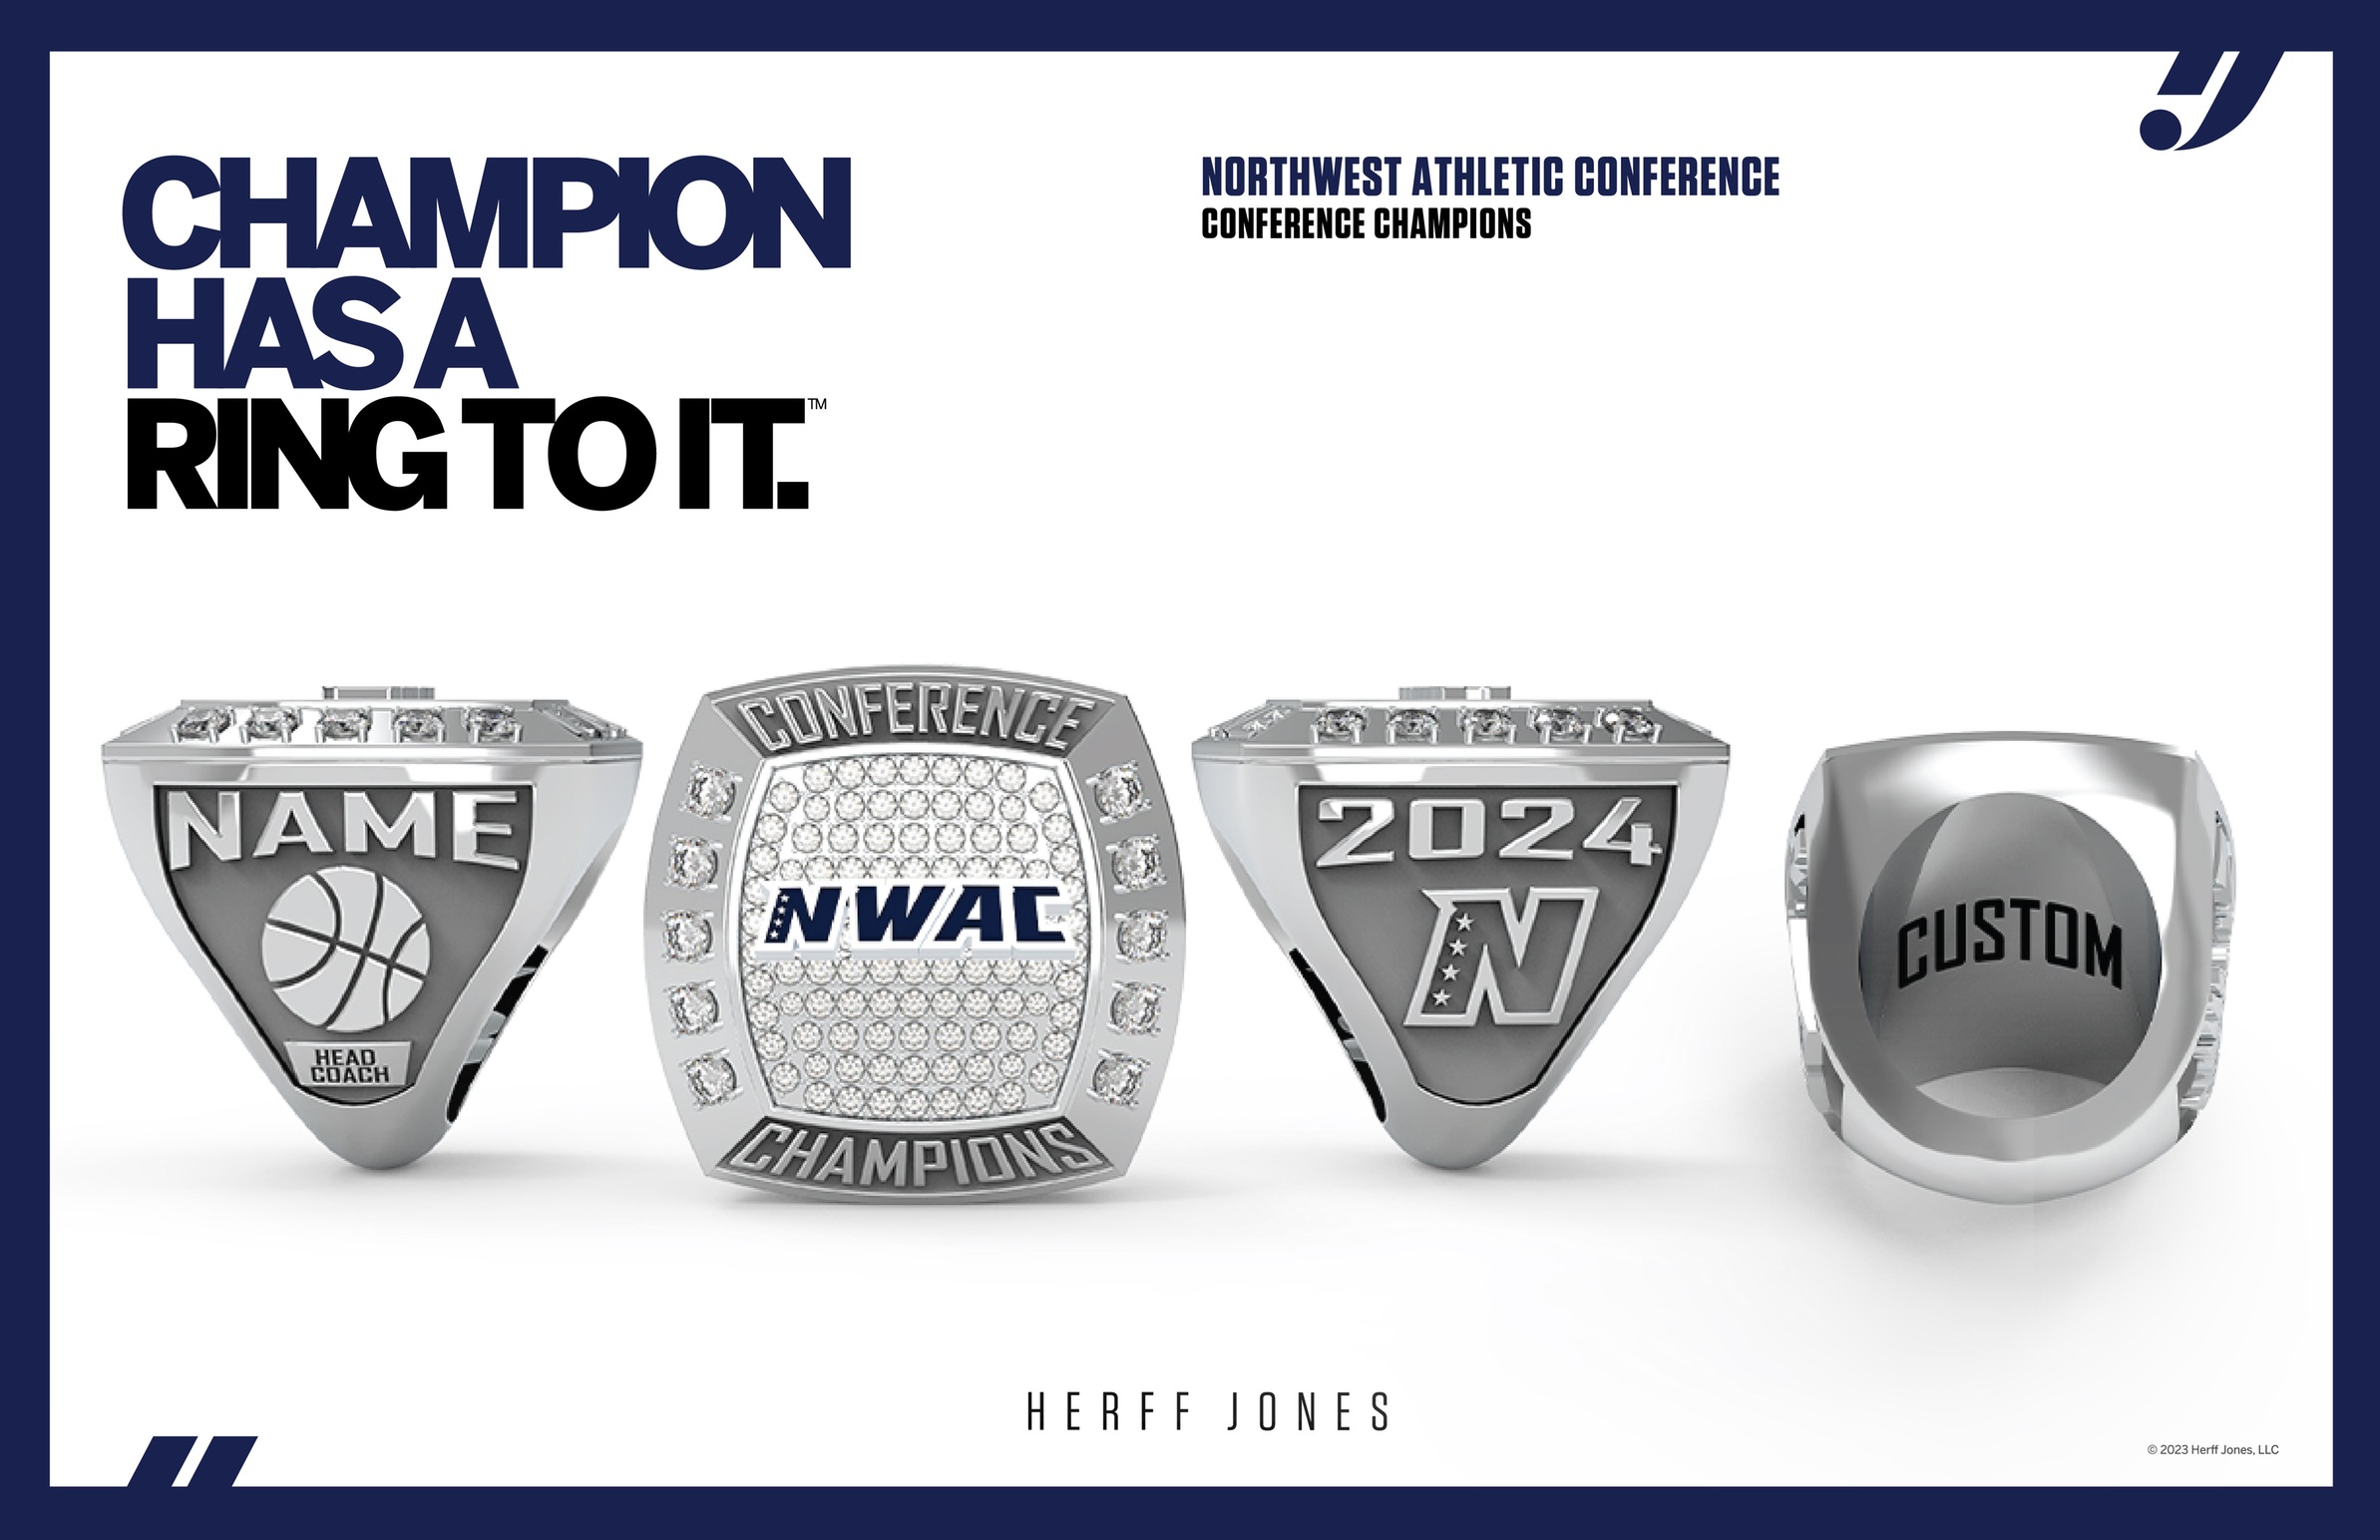 Herff Jones banner ad - Champion has a ring to it. Official ring provider of the NWAC.